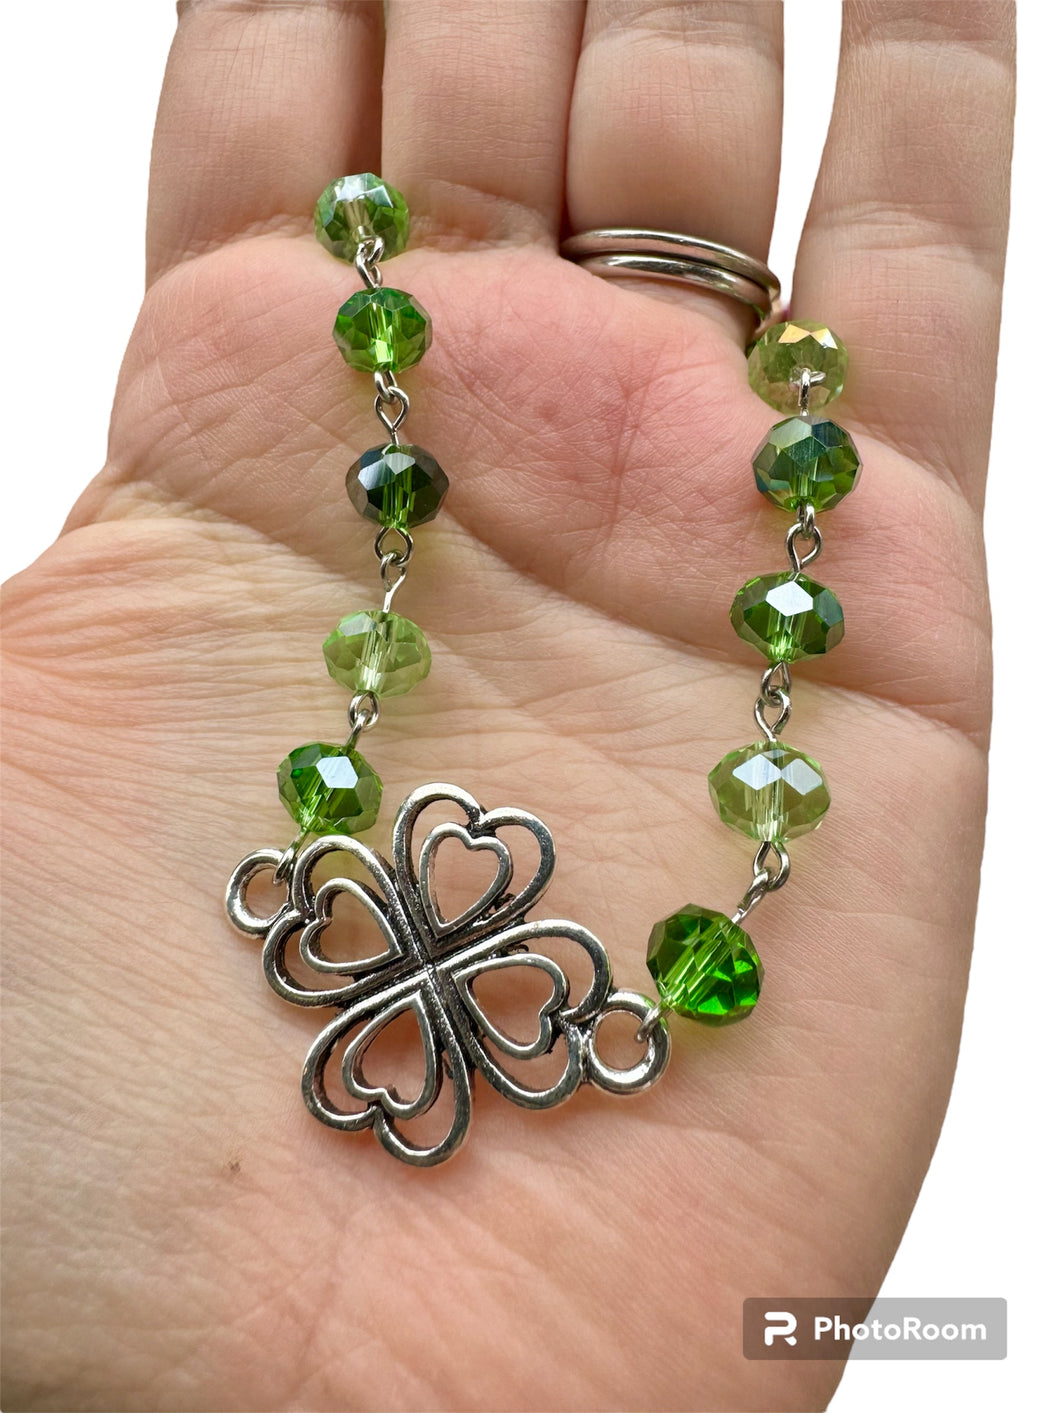 ZBB Petite Bling - St Patty’s Collection 2